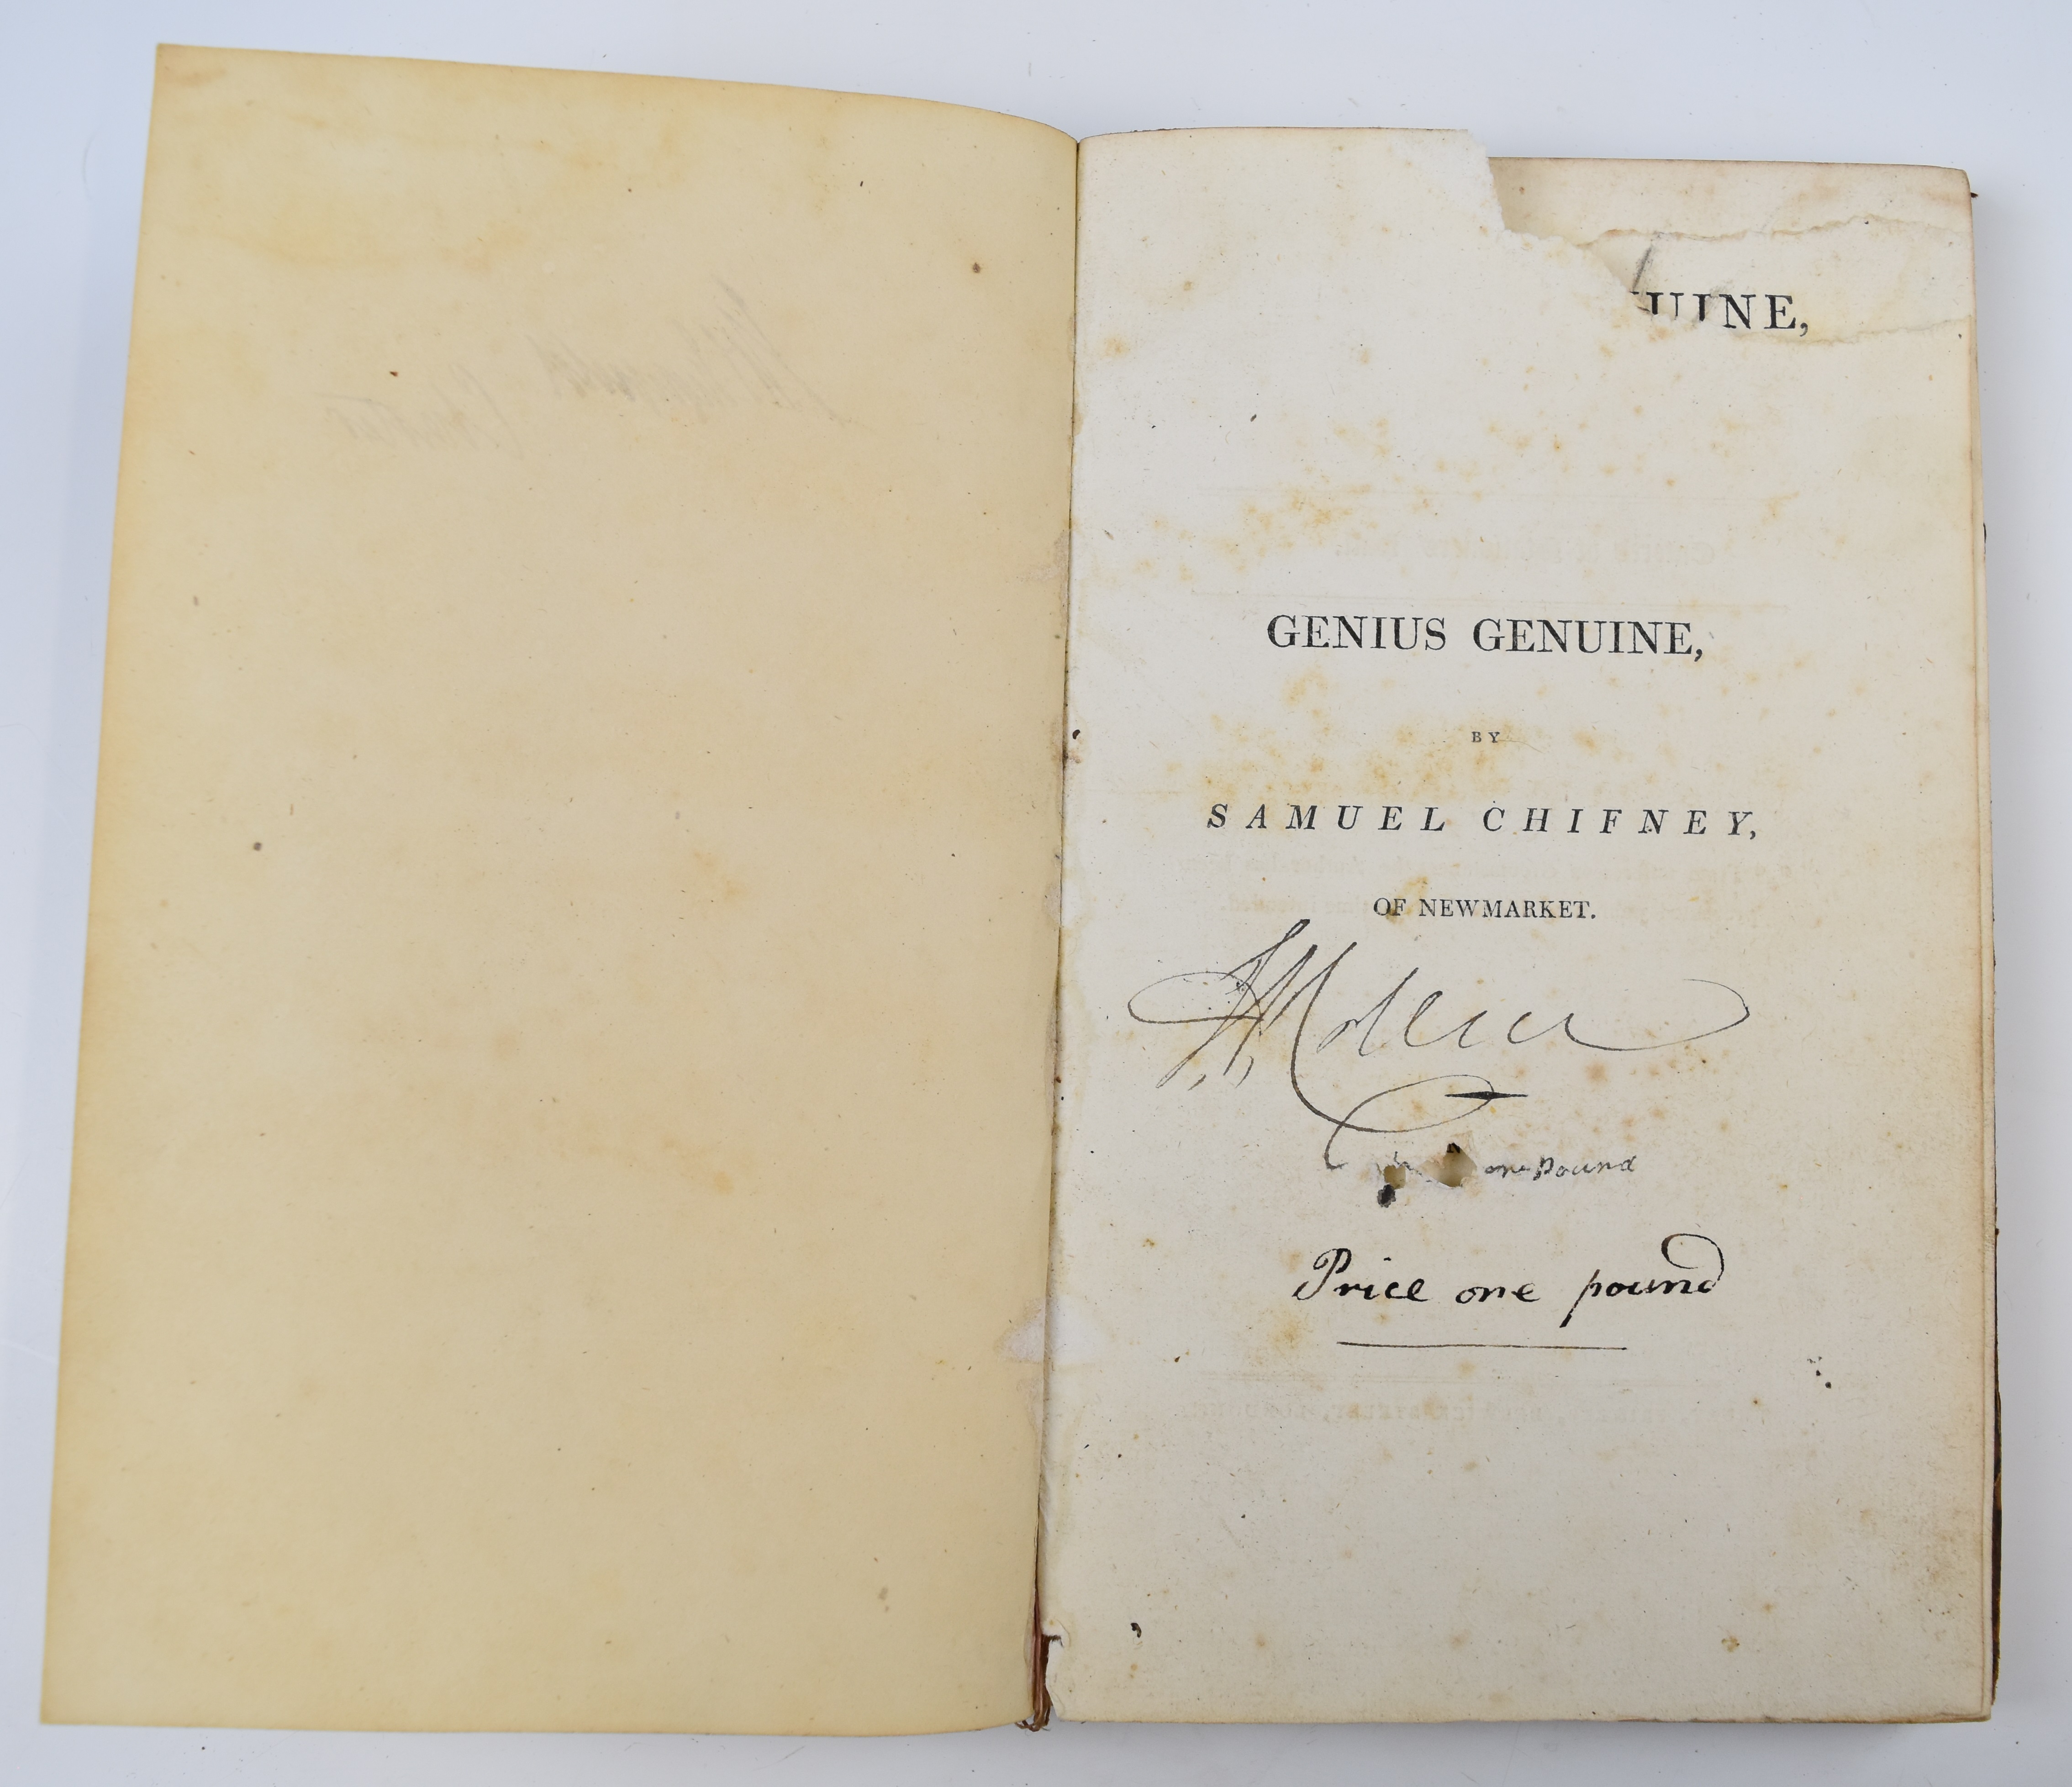 [Racing] The Jockey Club or a Sketch of the Manners of the Age (Charles Pigott), printed for H.D. - Image 2 of 4